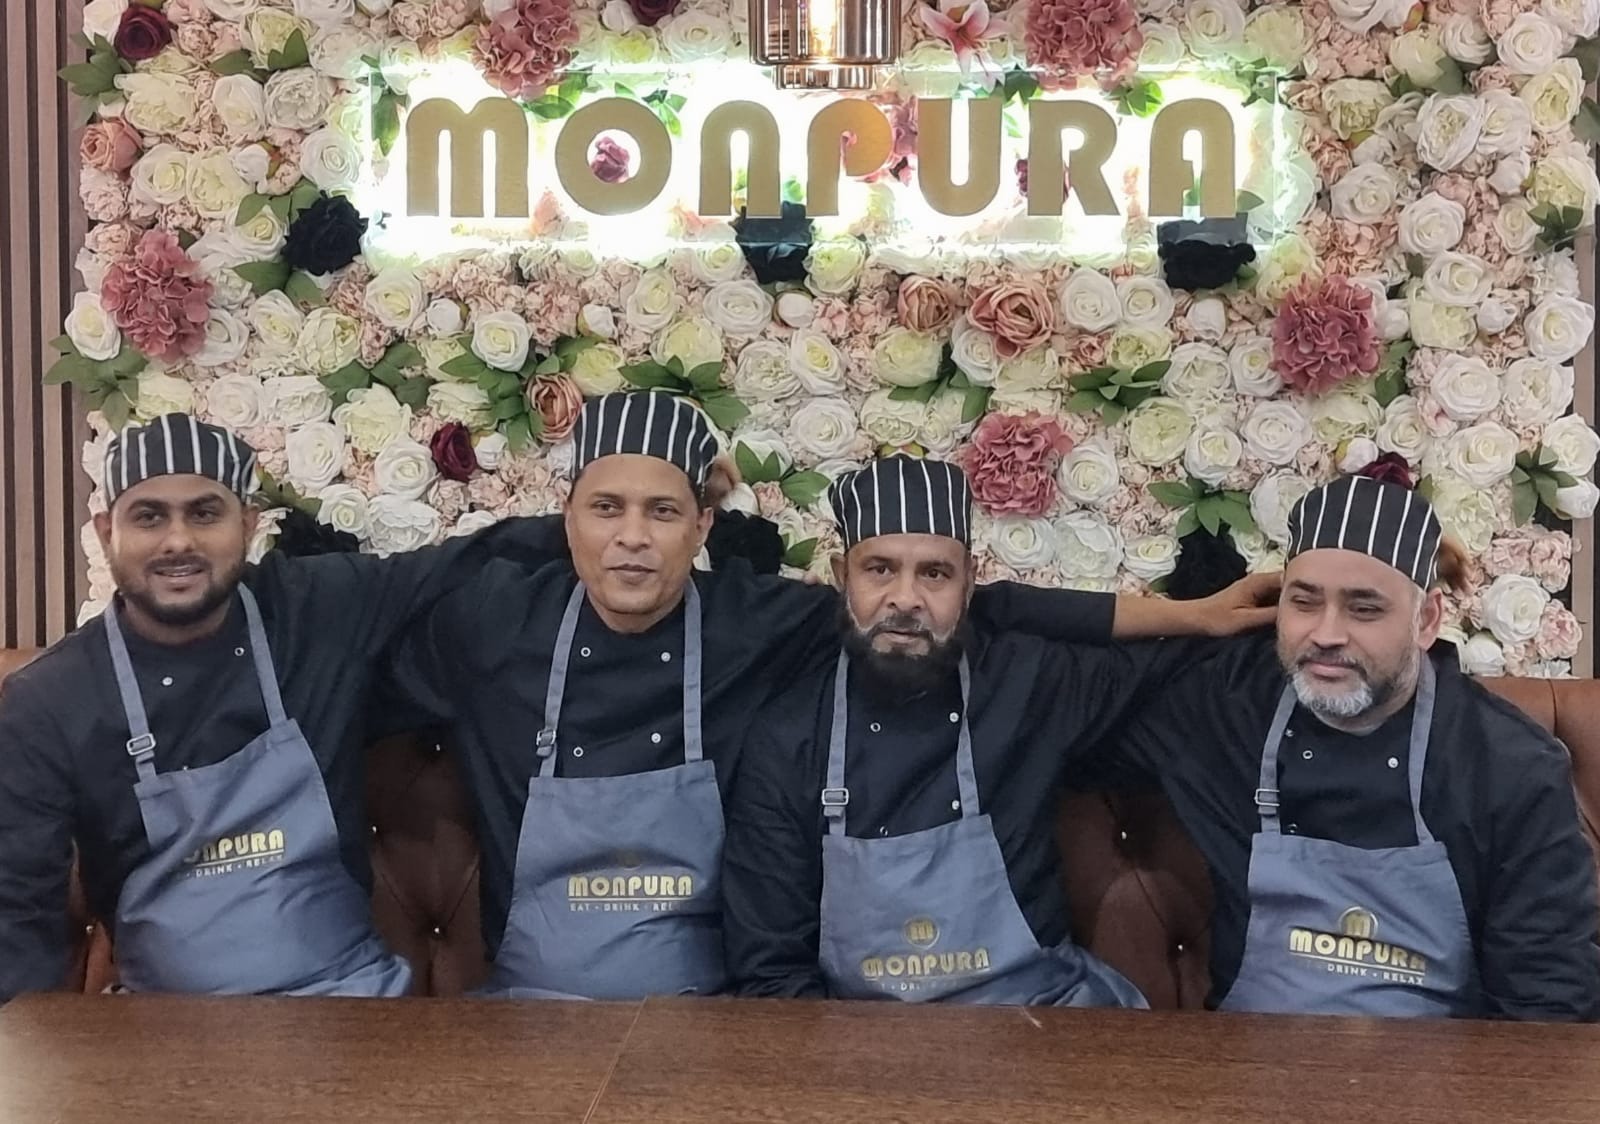 The talented team of chefs at Monpura